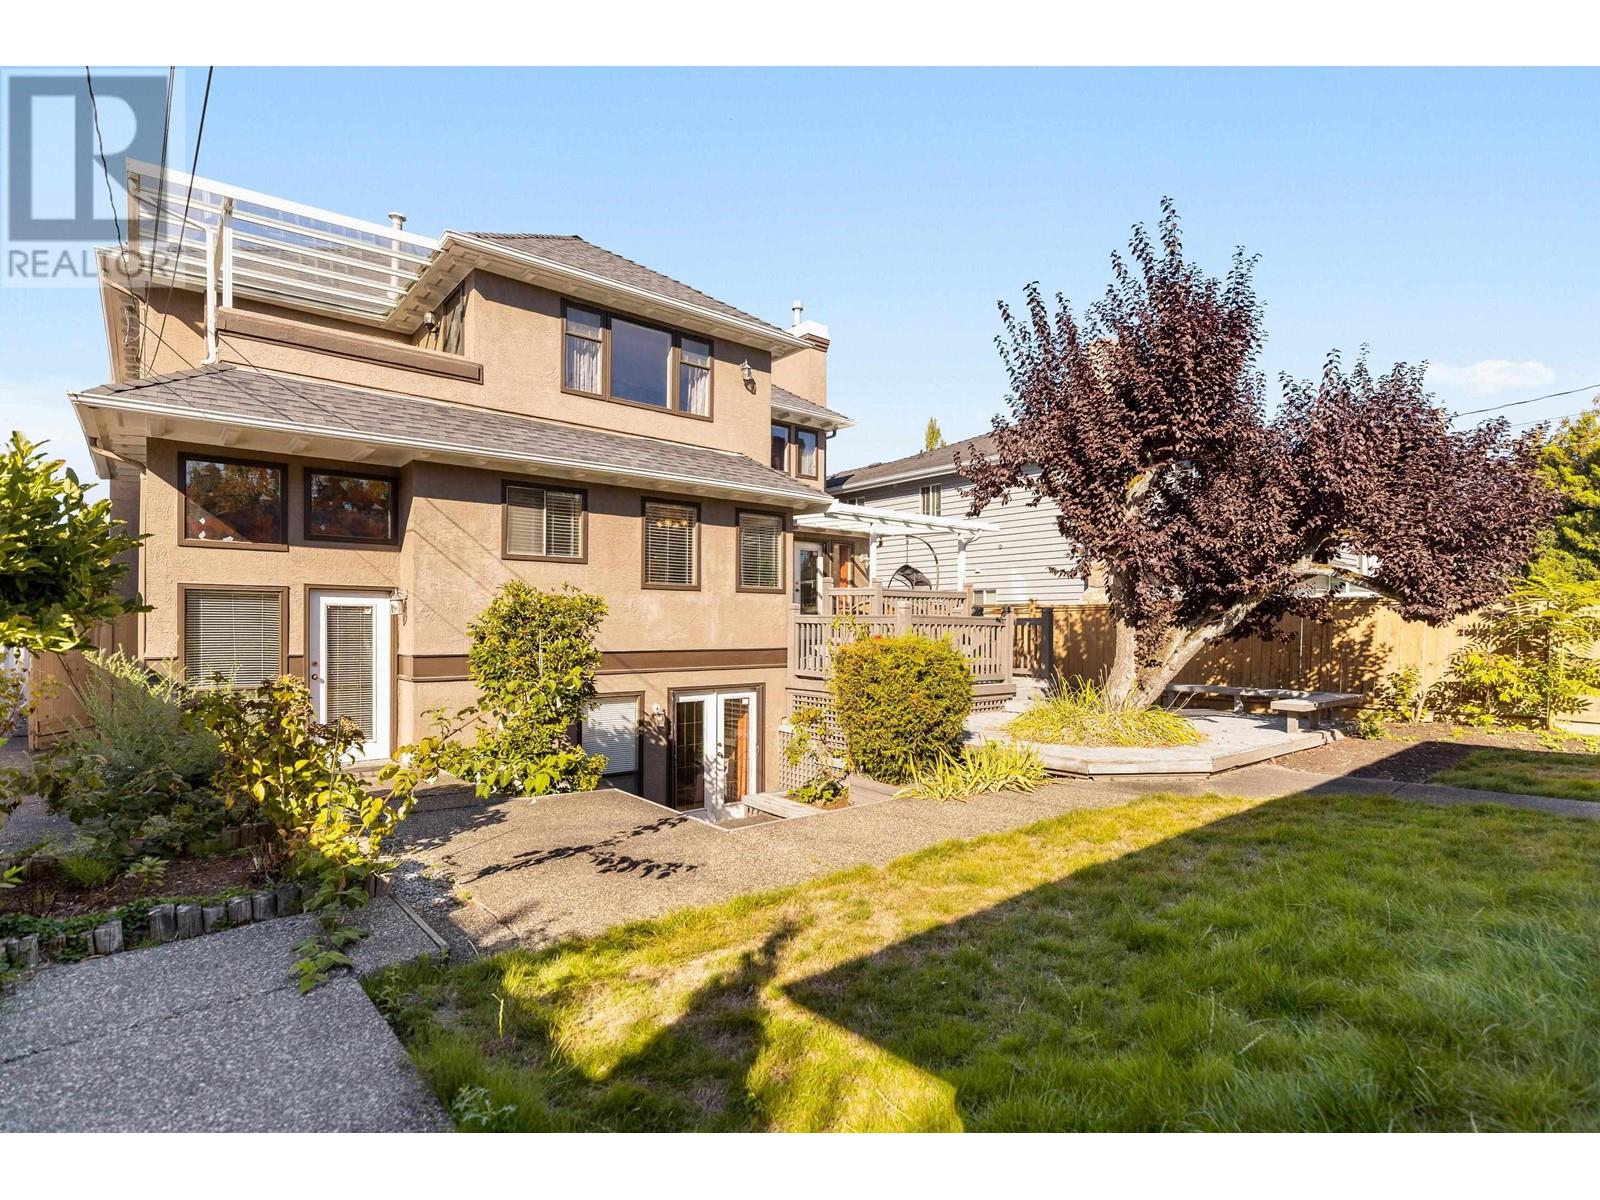 Listing Picture 37 of 40 : 2728 OLIVER CRESCENT, Vancouver / 溫哥華 - 魯藝地產 Yvonne Lu Group - MLS Medallion Club Member